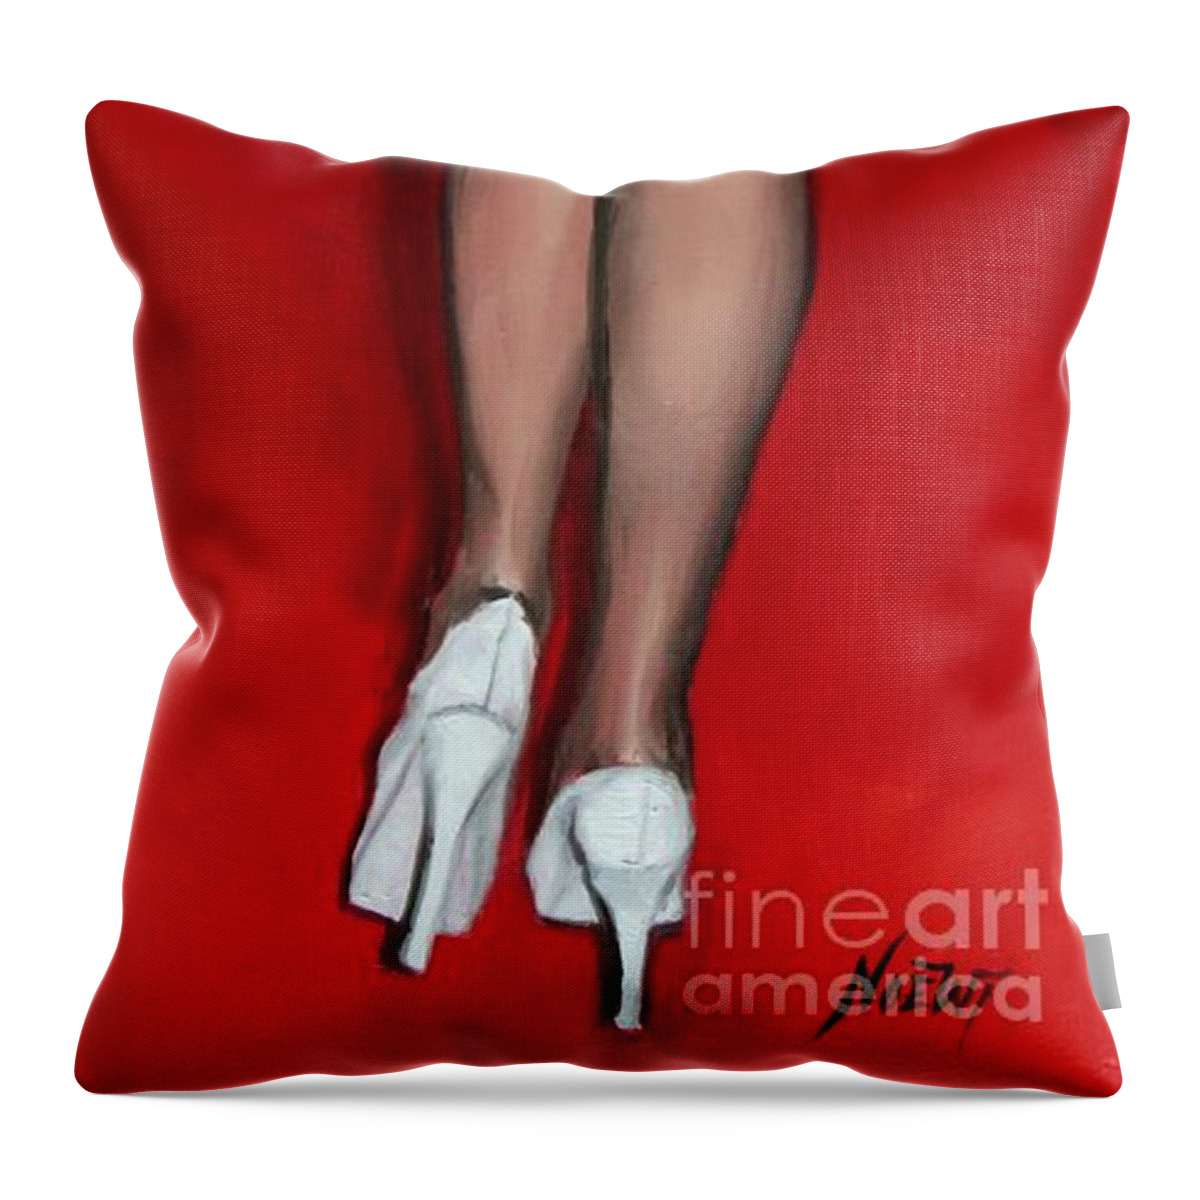 Noewi Throw Pillow featuring the painting Sassy Cheeks by Jindra Noewi